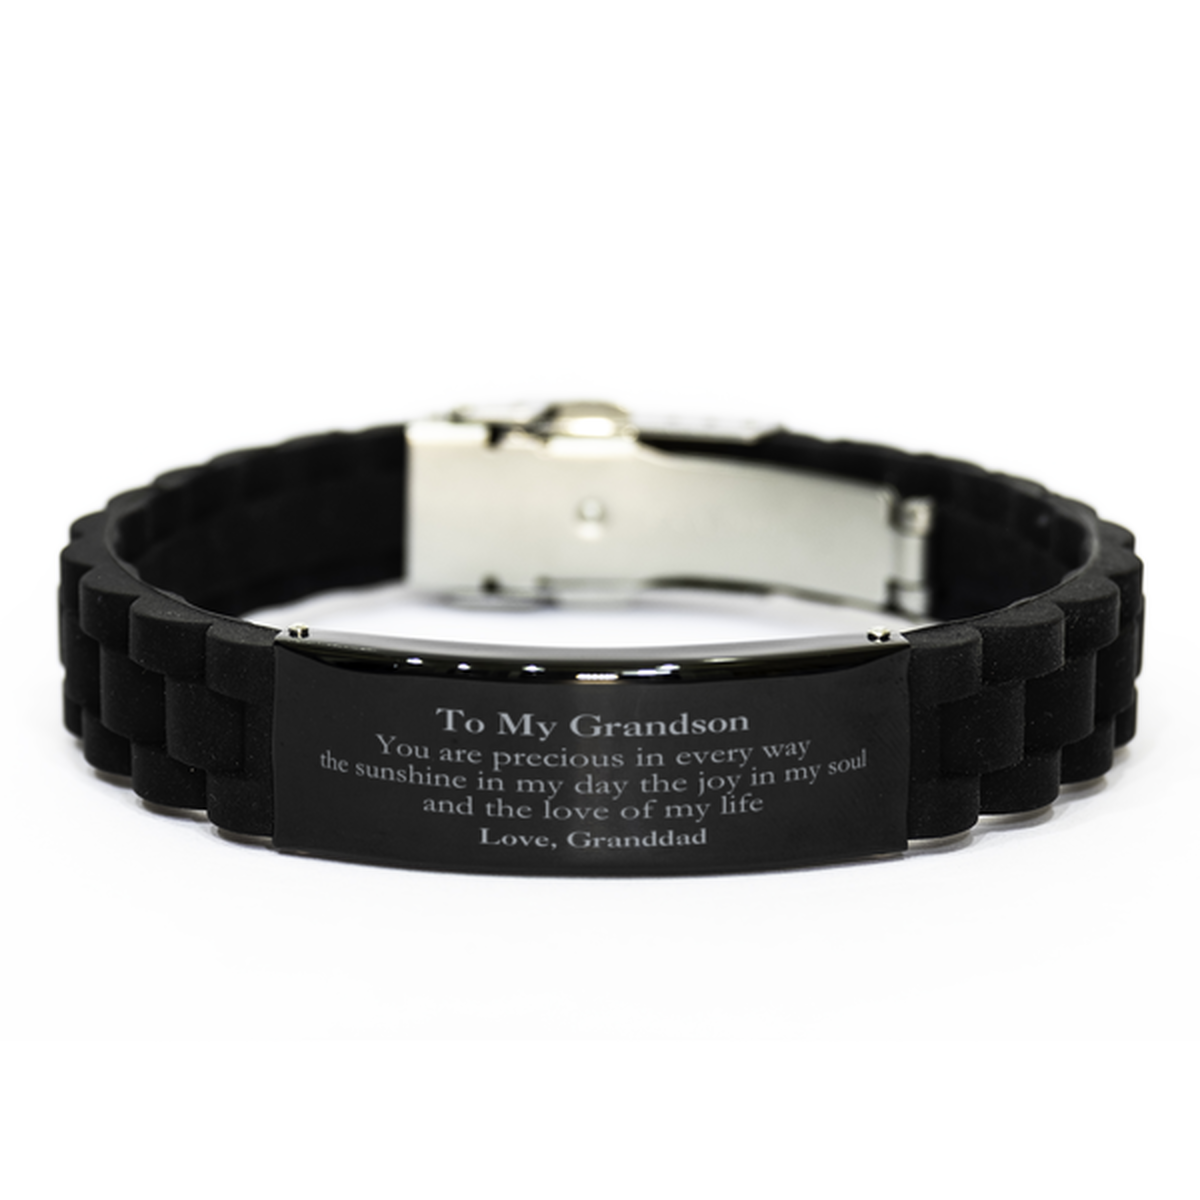 Graduation Gifts for Grandson Black Glidelock Clasp Bracelet Present from Granddad, Christmas Grandson Birthday Gifts Grandson You are precious in every way the sunshine in my day. Love, Granddad